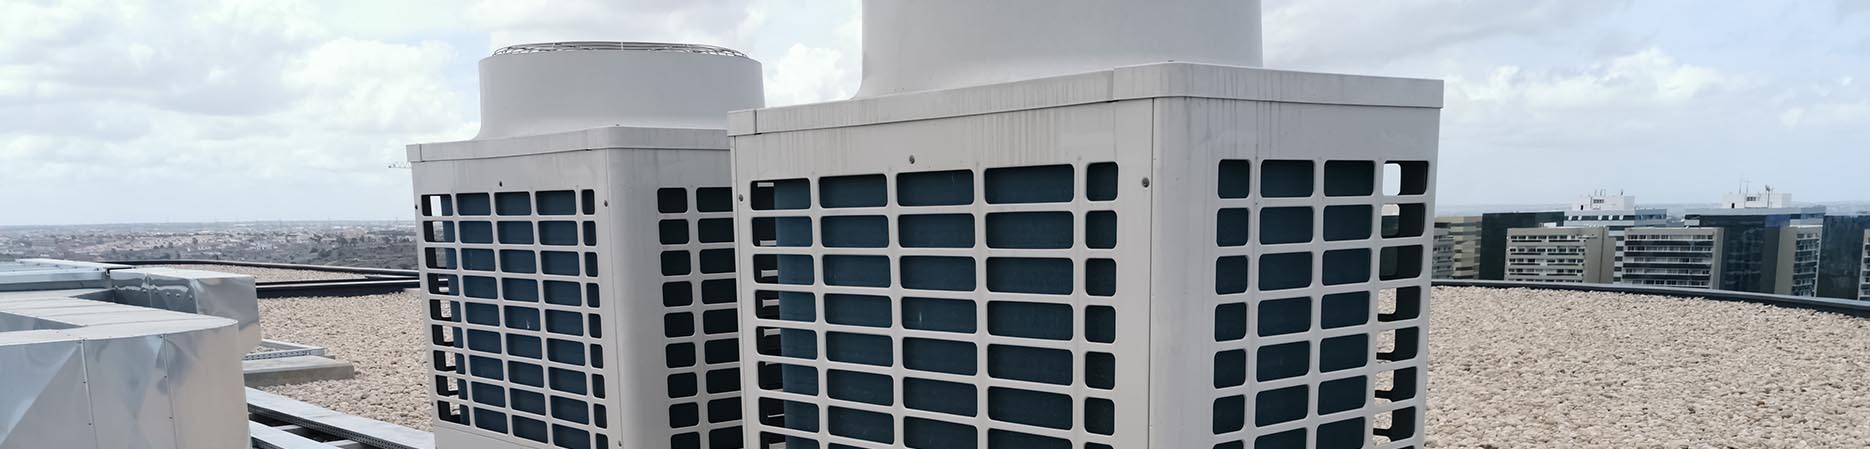 Air Conditioning Vent